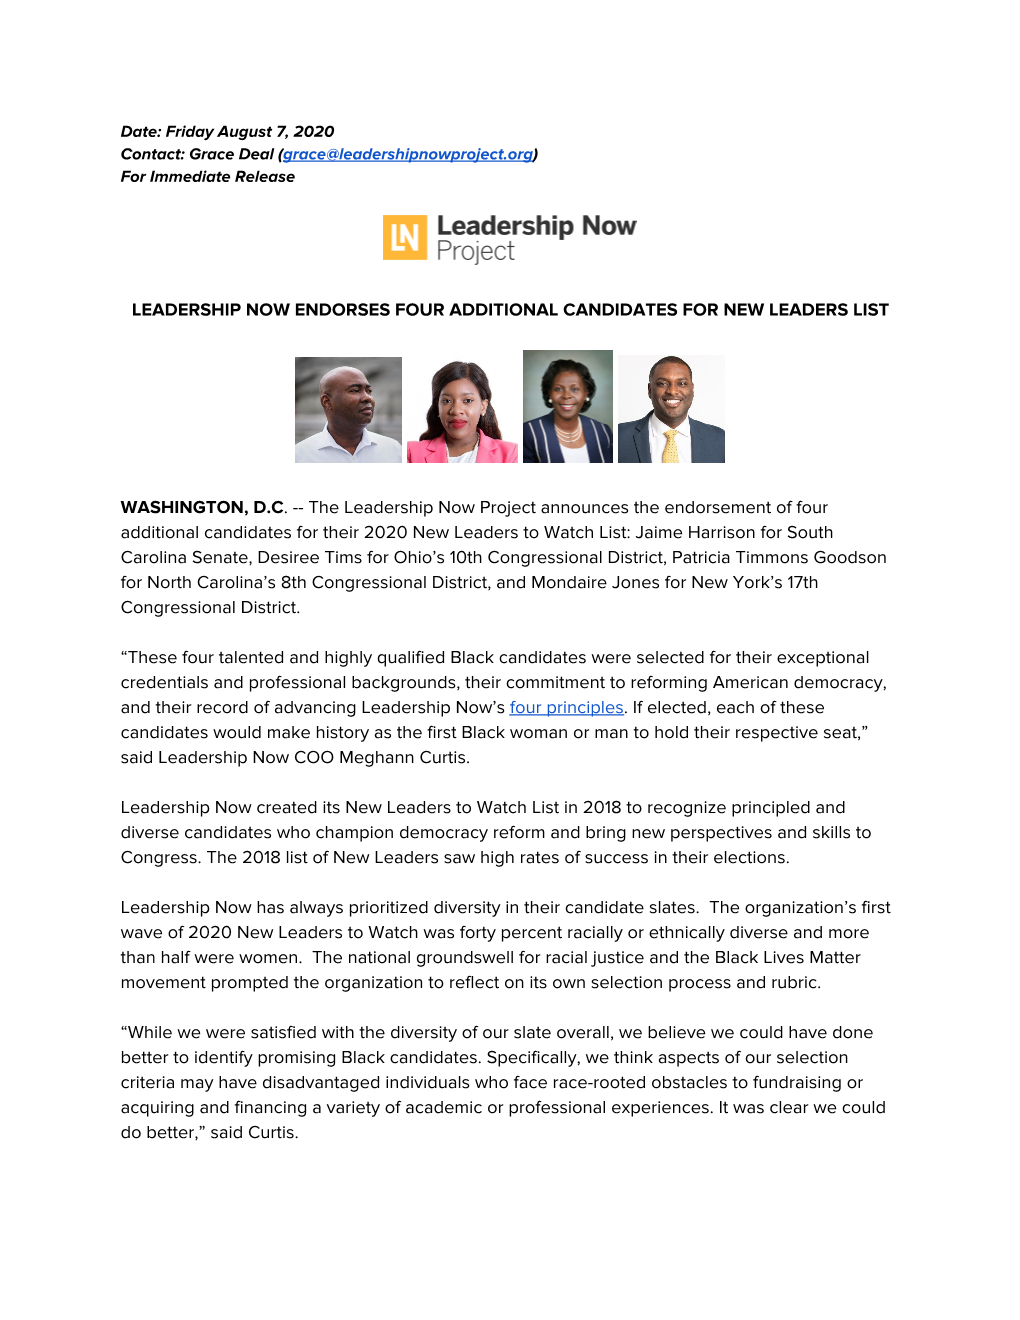 Leadership Now Endorses Four Additional Candidates for New Leaders List